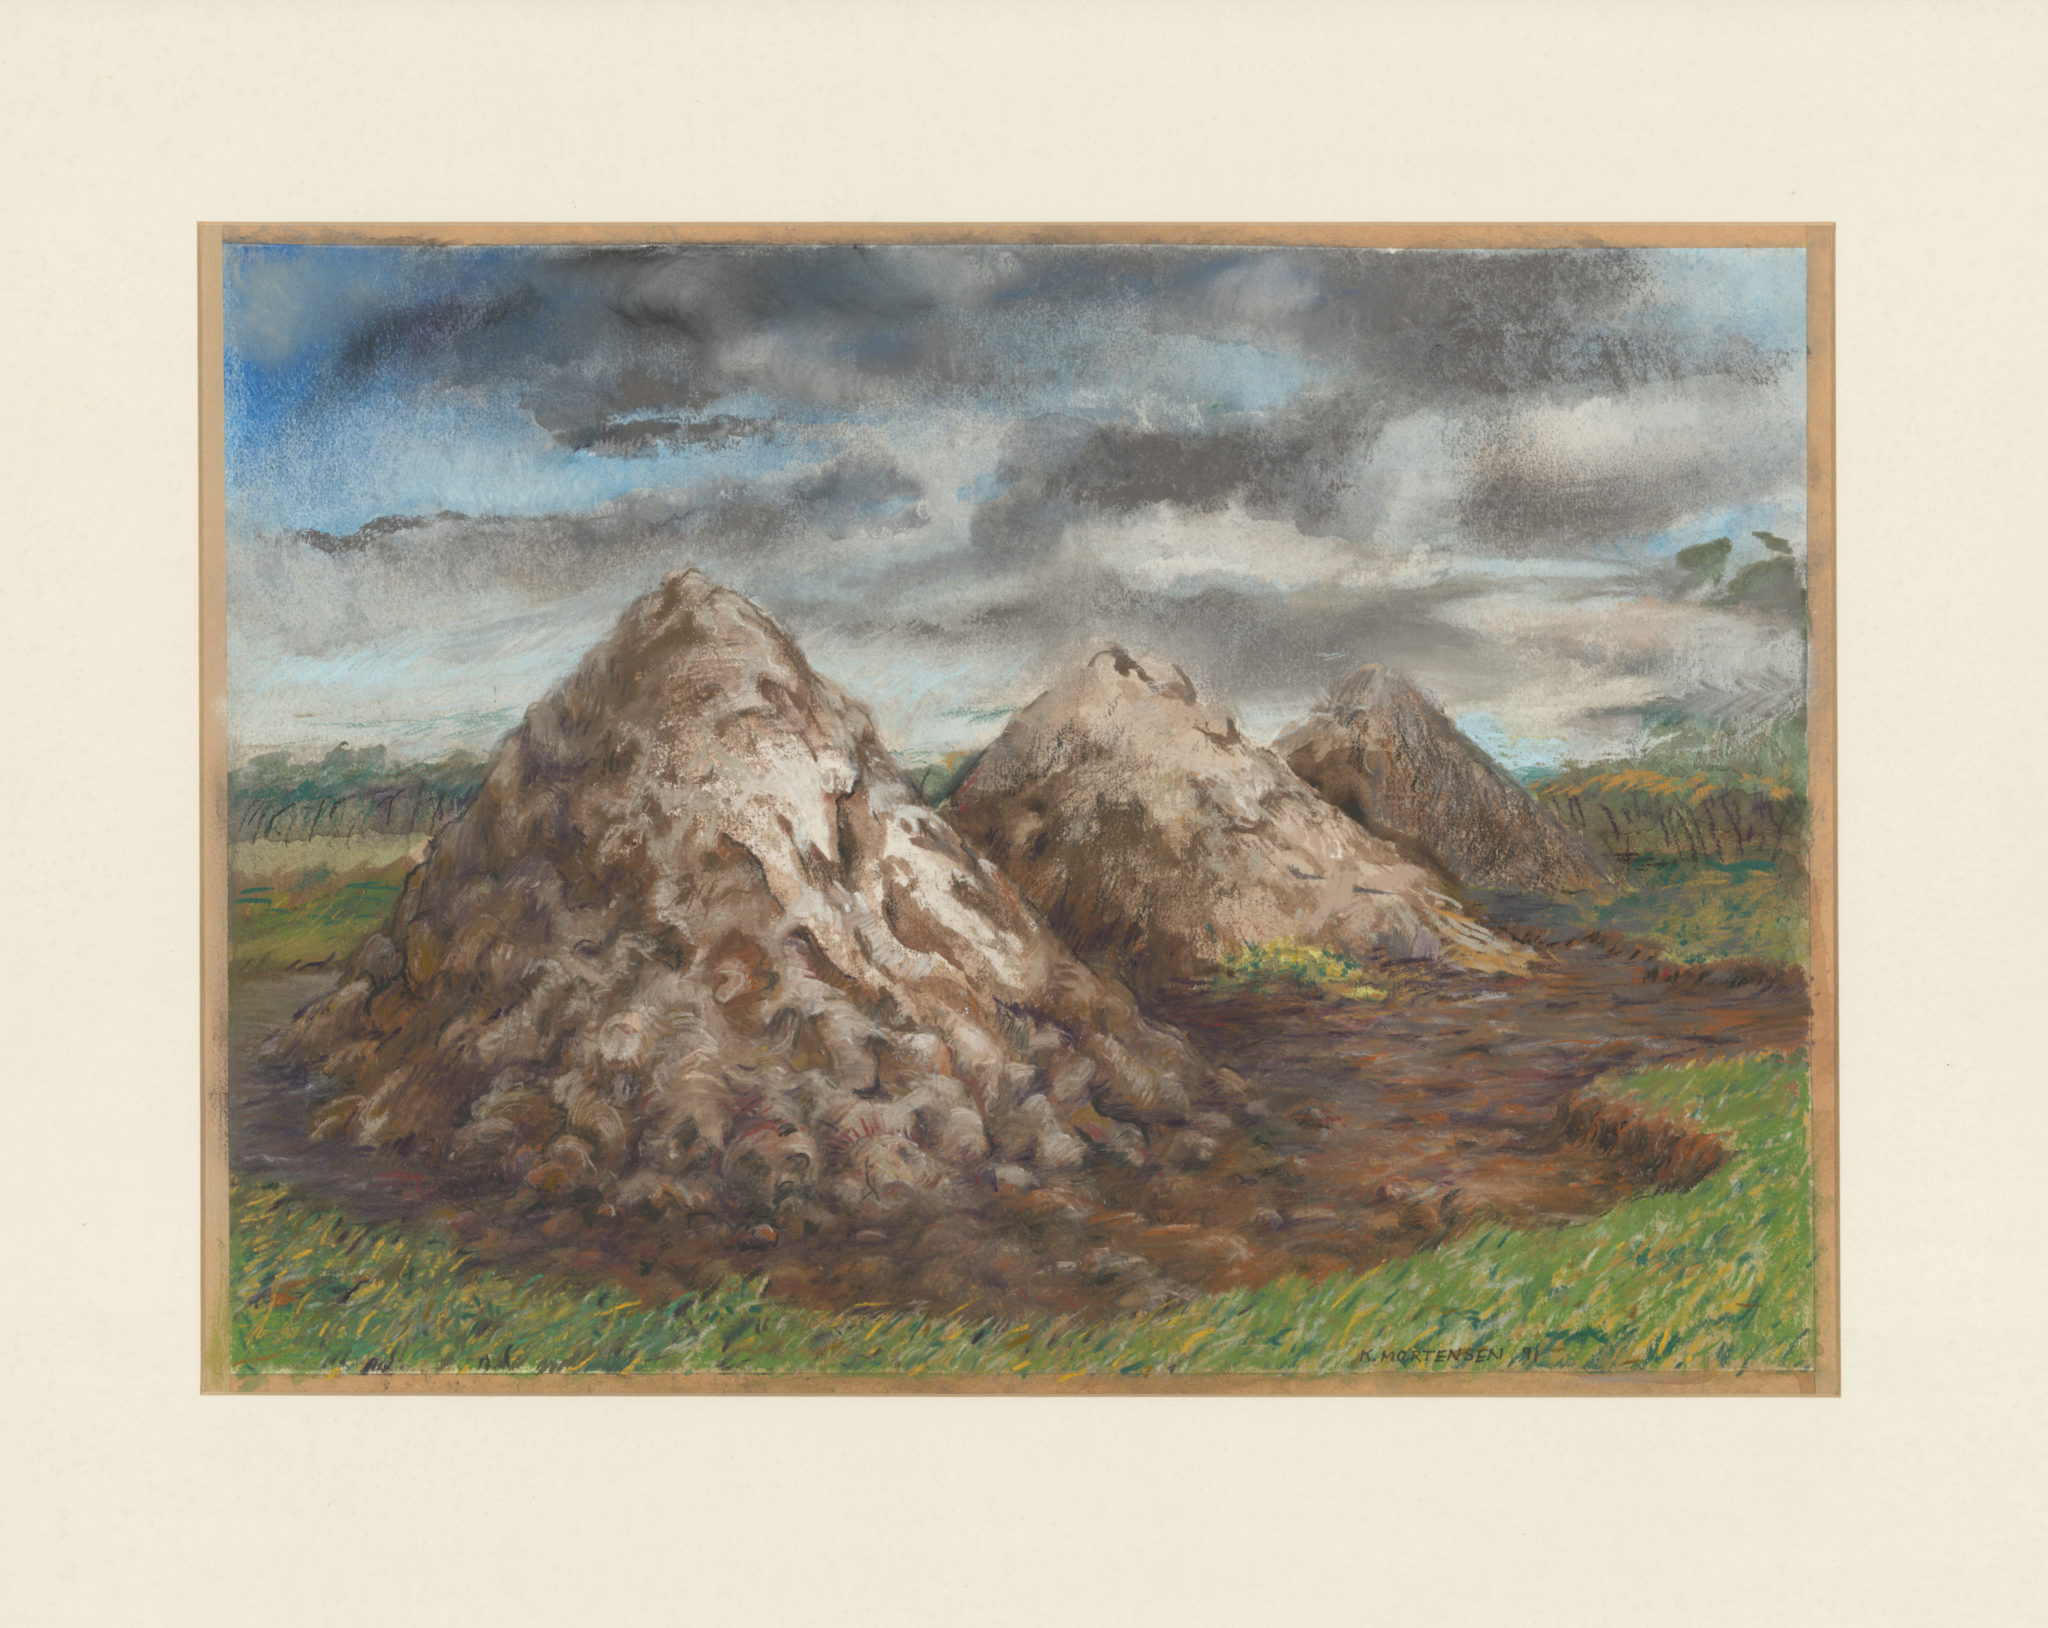 Kevin Mortensen, Three Mounds near Wonthaggi, 1991, Pastel and watercolour on paper, 34 x 48 cm, Latrobe Regional Gallery Collection, purchased 1991.